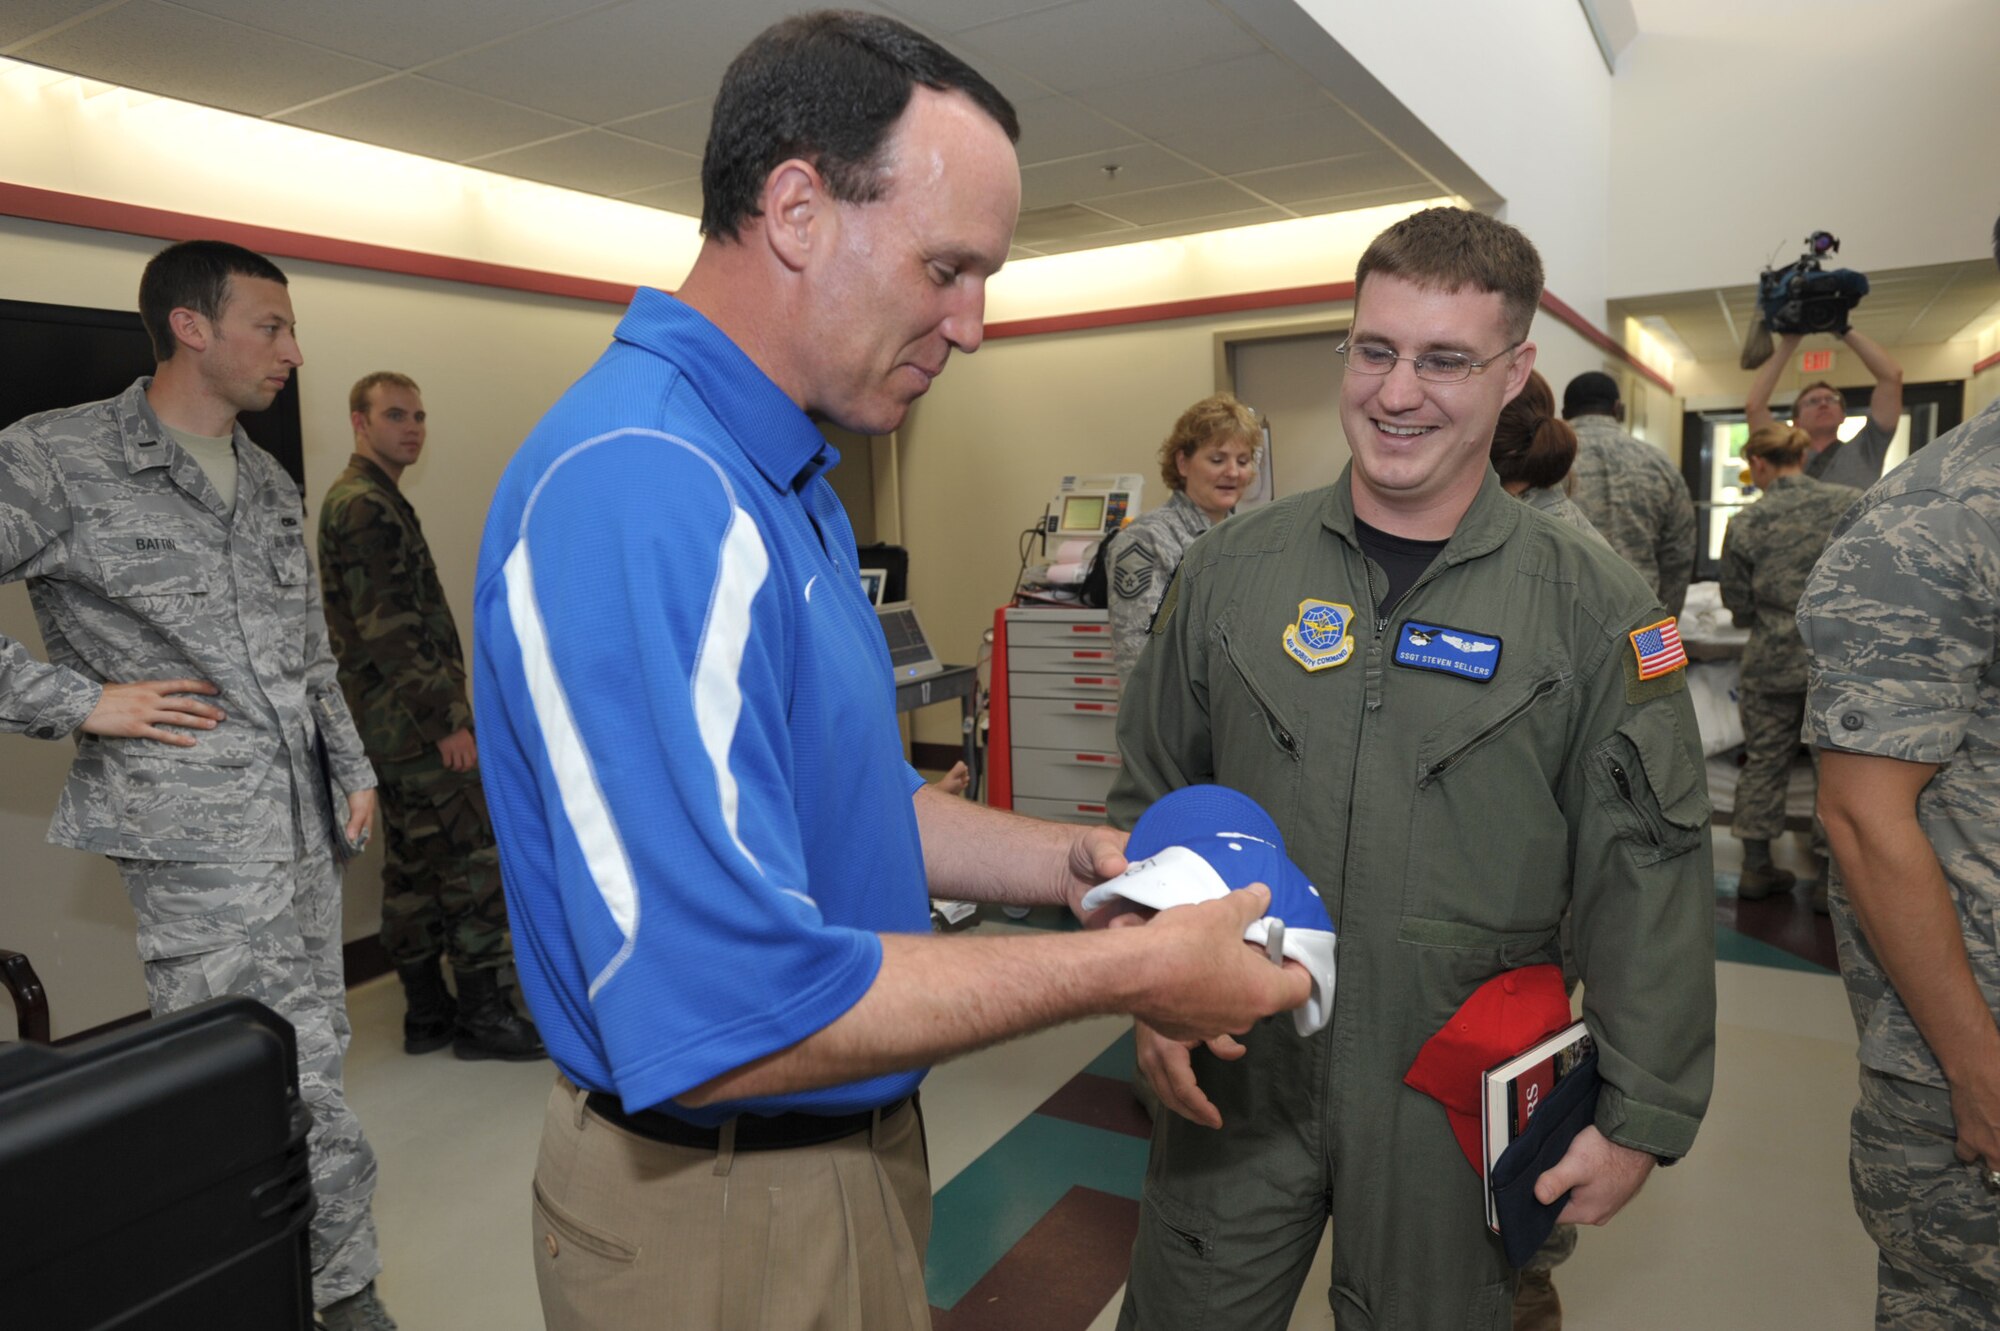 Troy Calhoun, head coach of the Air Force football team, gives an autographed hat to Staff Sgt. Steve Sellers during a visit to McConnell Air Force Base, Kan., on May 27. Coach Calhoun and two other NCAA football coaches--Jim Grobe of Wake Forest and Jim Tressel of Ohio State--were at the base to kickoff Coaches Tour 2009, a second annual morale-boosting mission that brings icons of college football to U.S. servicemembers. Sergeant Sellers is a KC-135 Stratotanker boom operator and native of Killeen, Texas. (U.S. Air Force photo/Tech. Sgt. Jason Schaap)